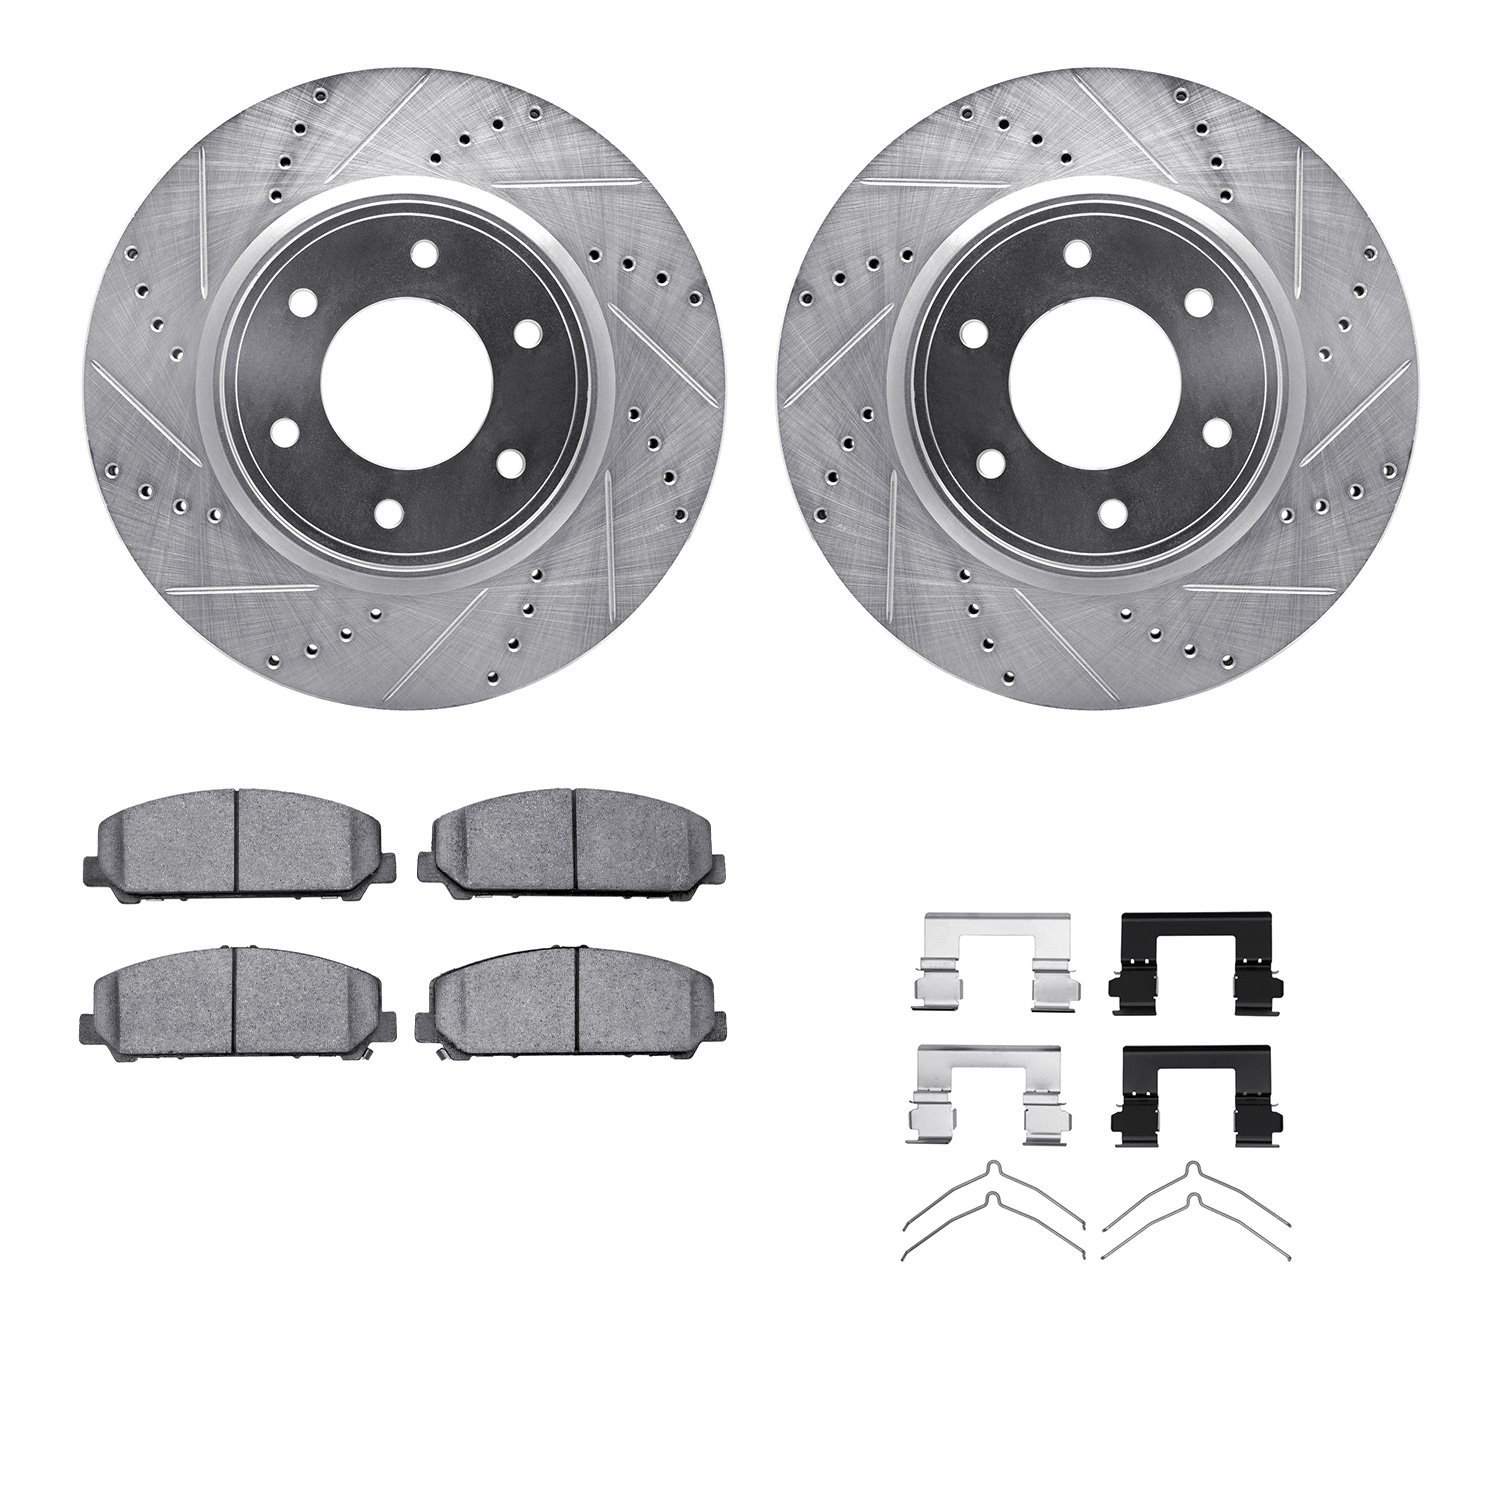 7412-67005 Drilled/Slotted Brake Rotors with Ultimate-Duty Brake Pads Kit & Hardware [Silver], Fits Select Infiniti/Nissan, Posi